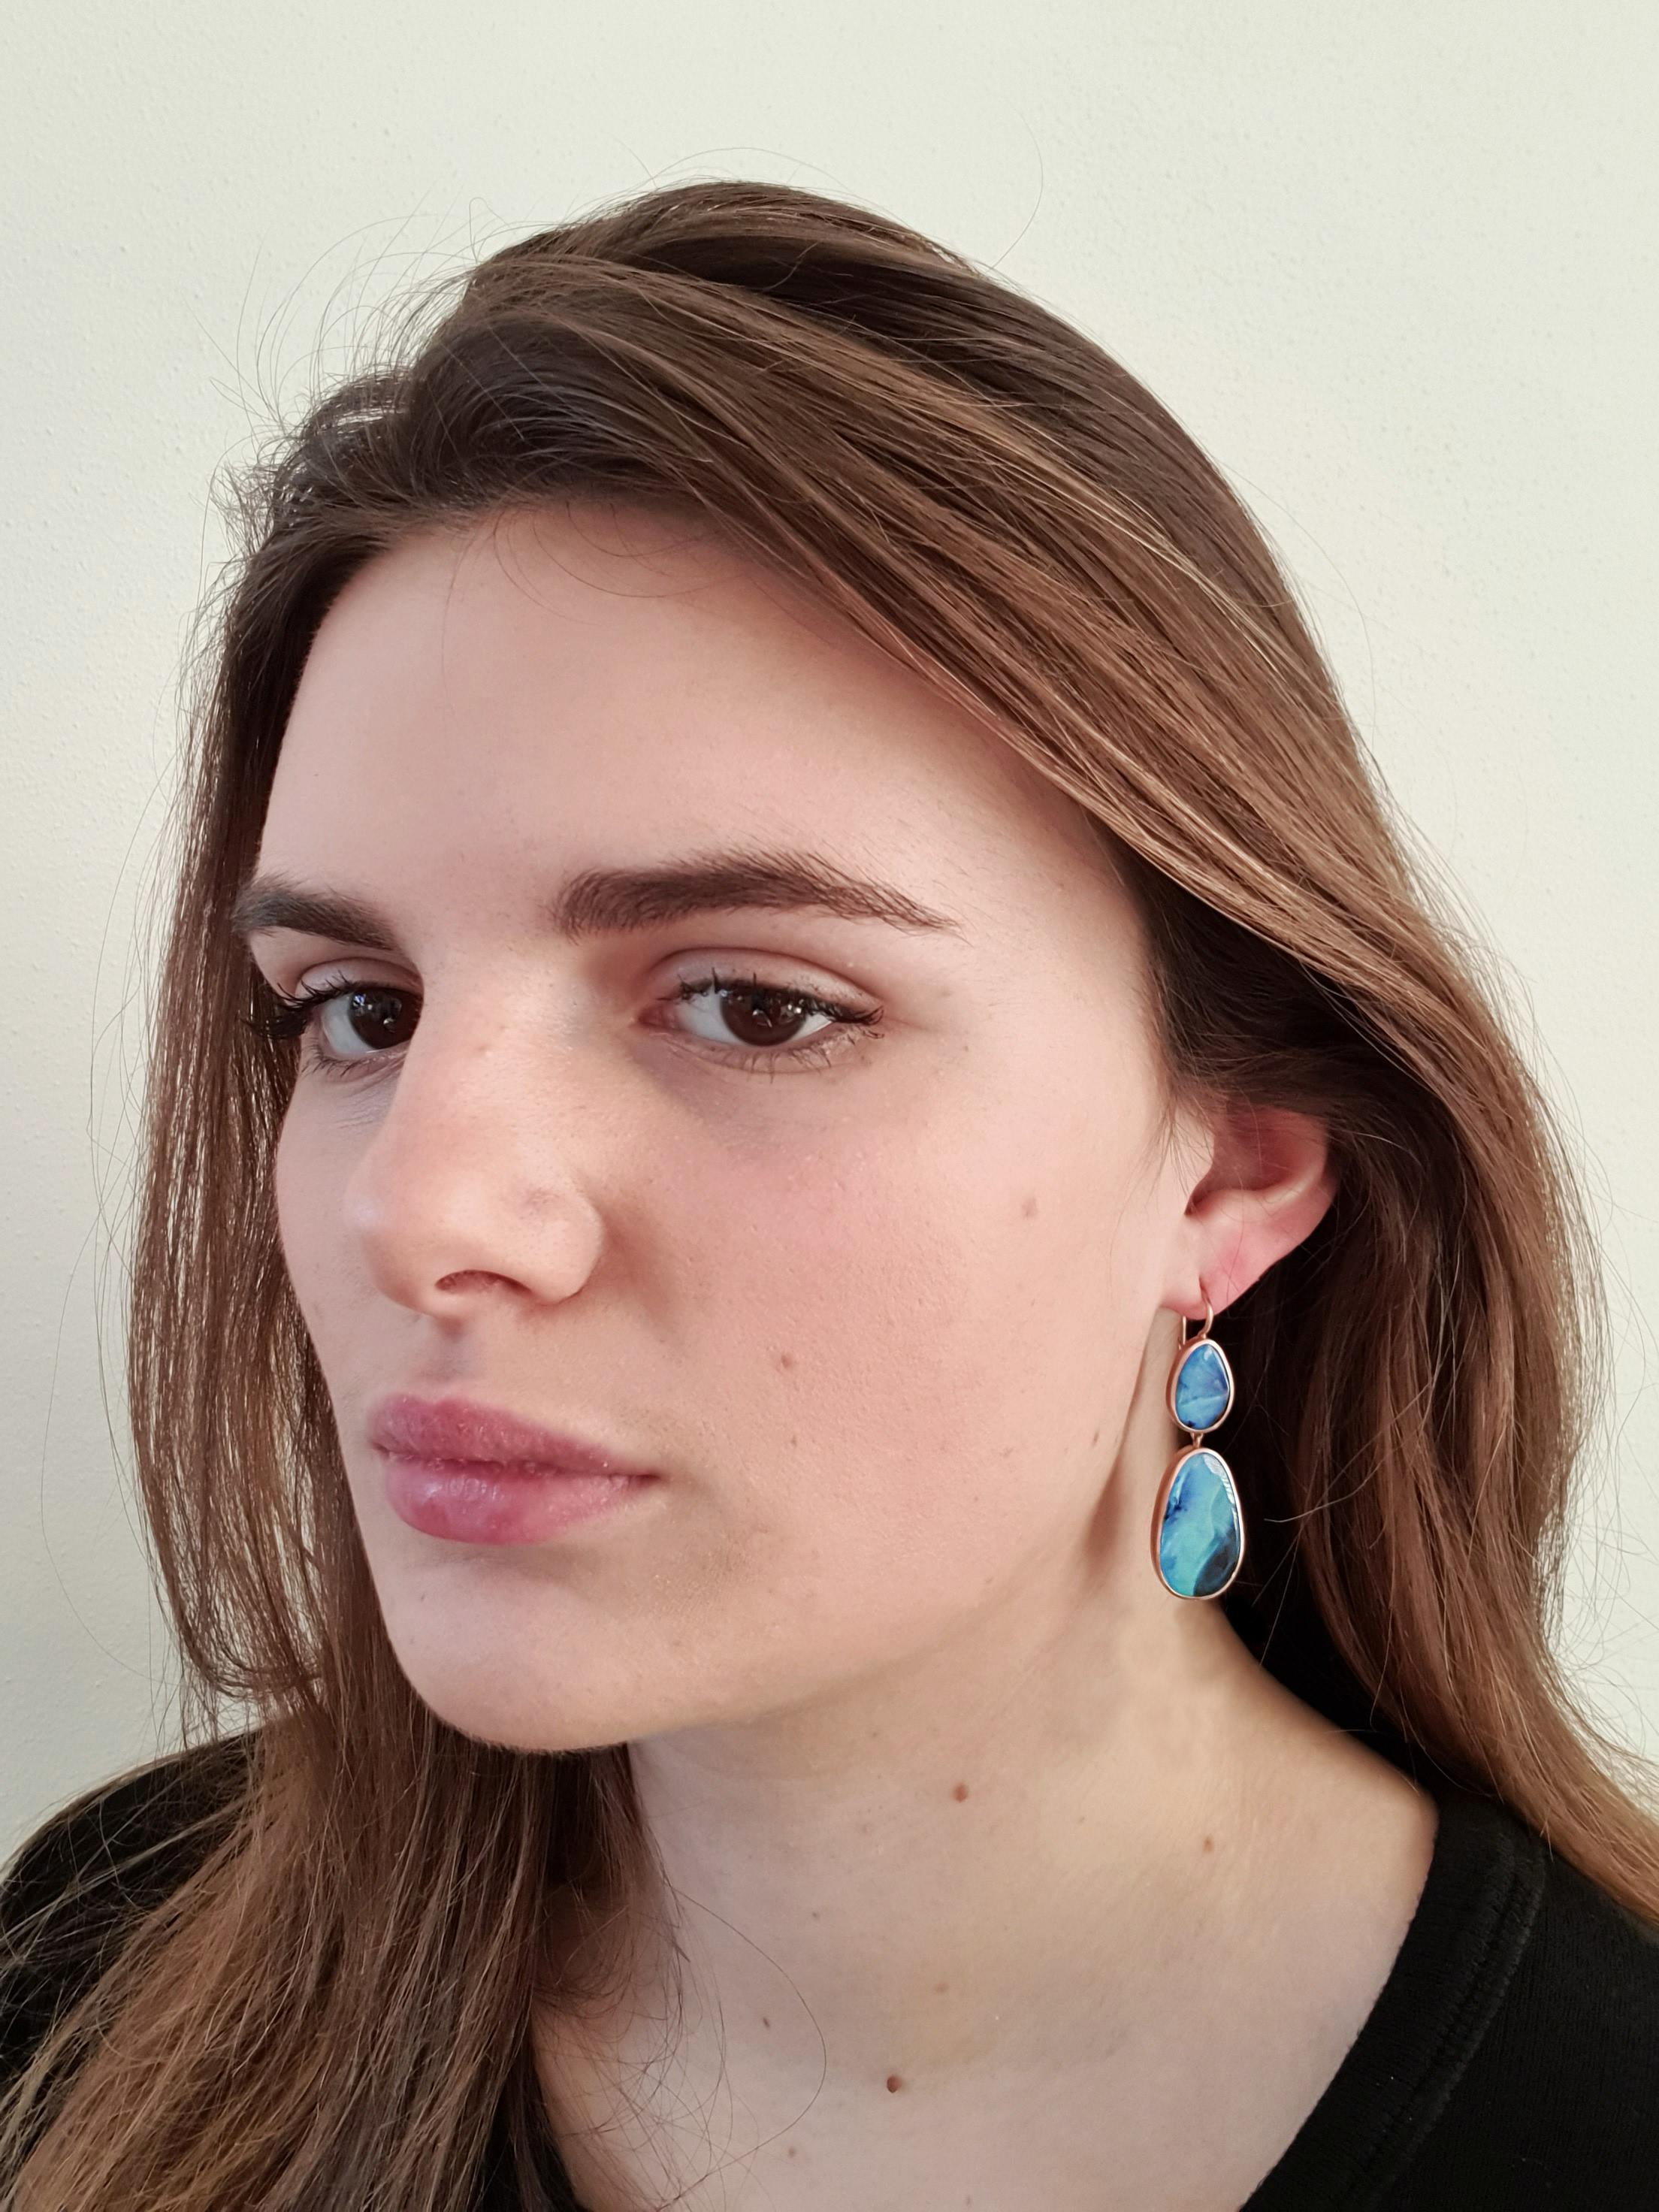 Dalben design One of a kind 18k rose gold matte finishing dangle earrings with 4  light blue bezel set Australian Boulder Opals weighing 25,72 carats.  
max width 14,50 mm 
height without leverback 41 mm
height with leverback 47-48 mm  
The earrings